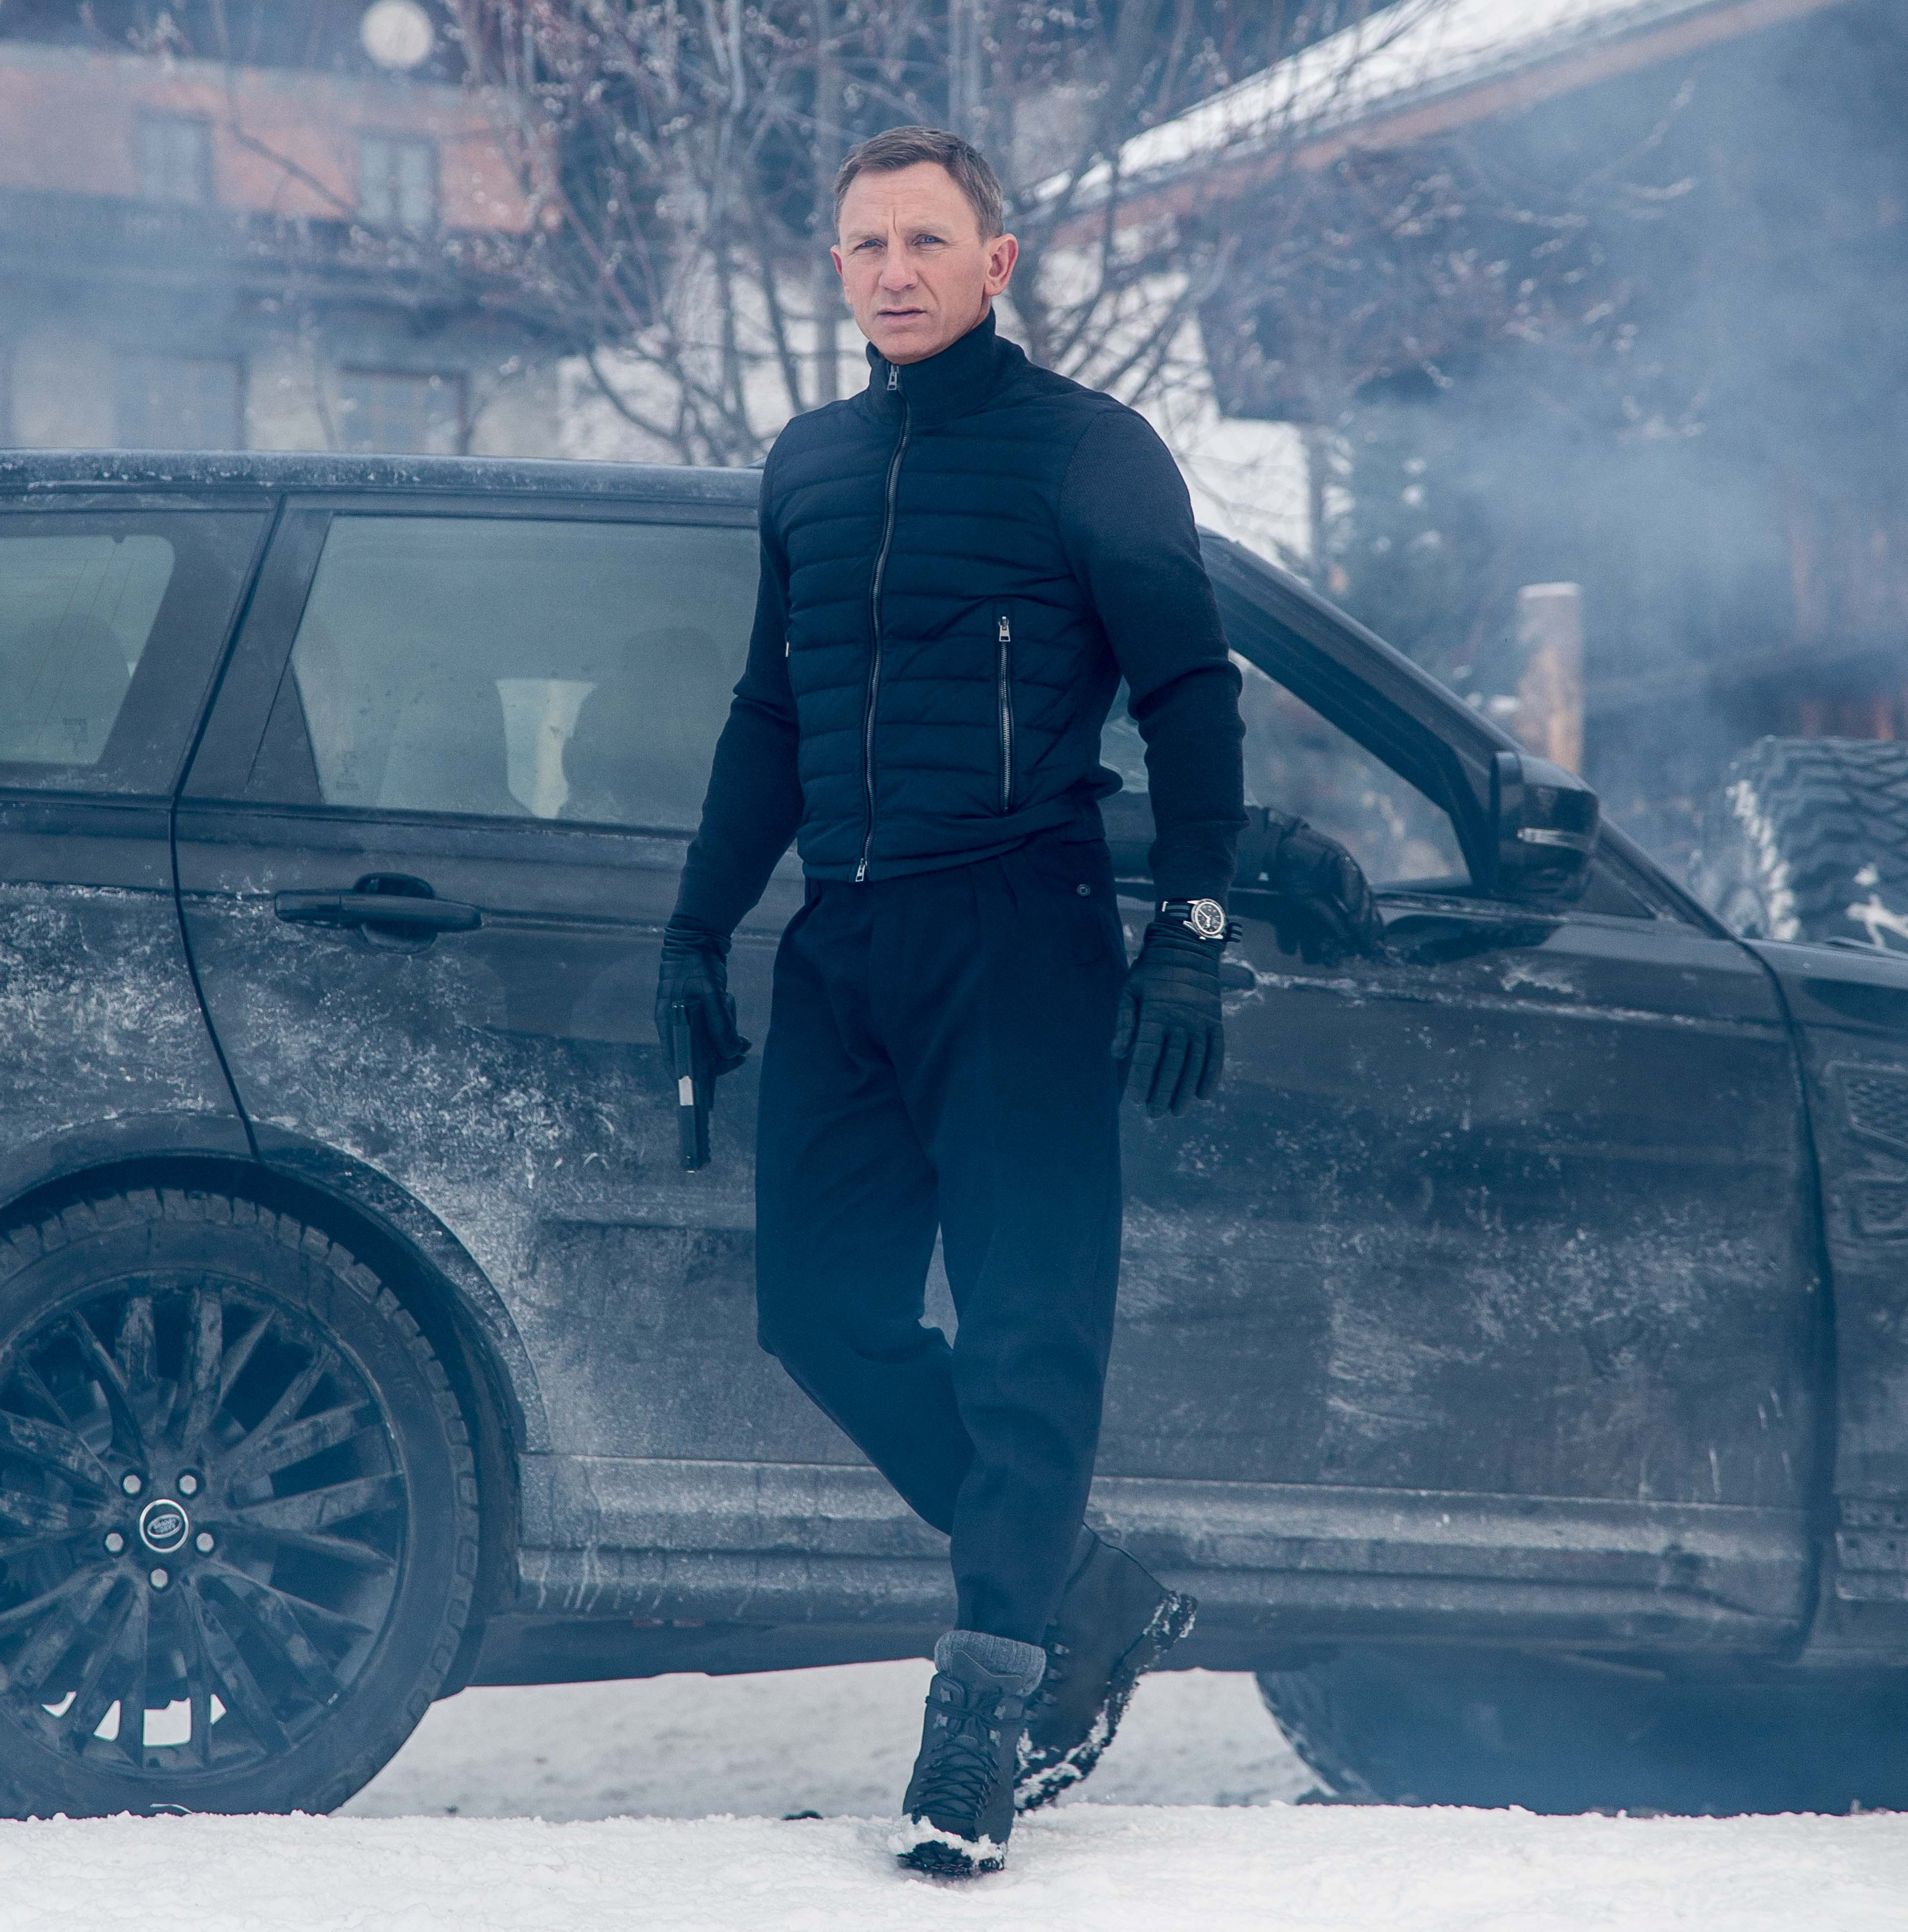 spectre where to watch